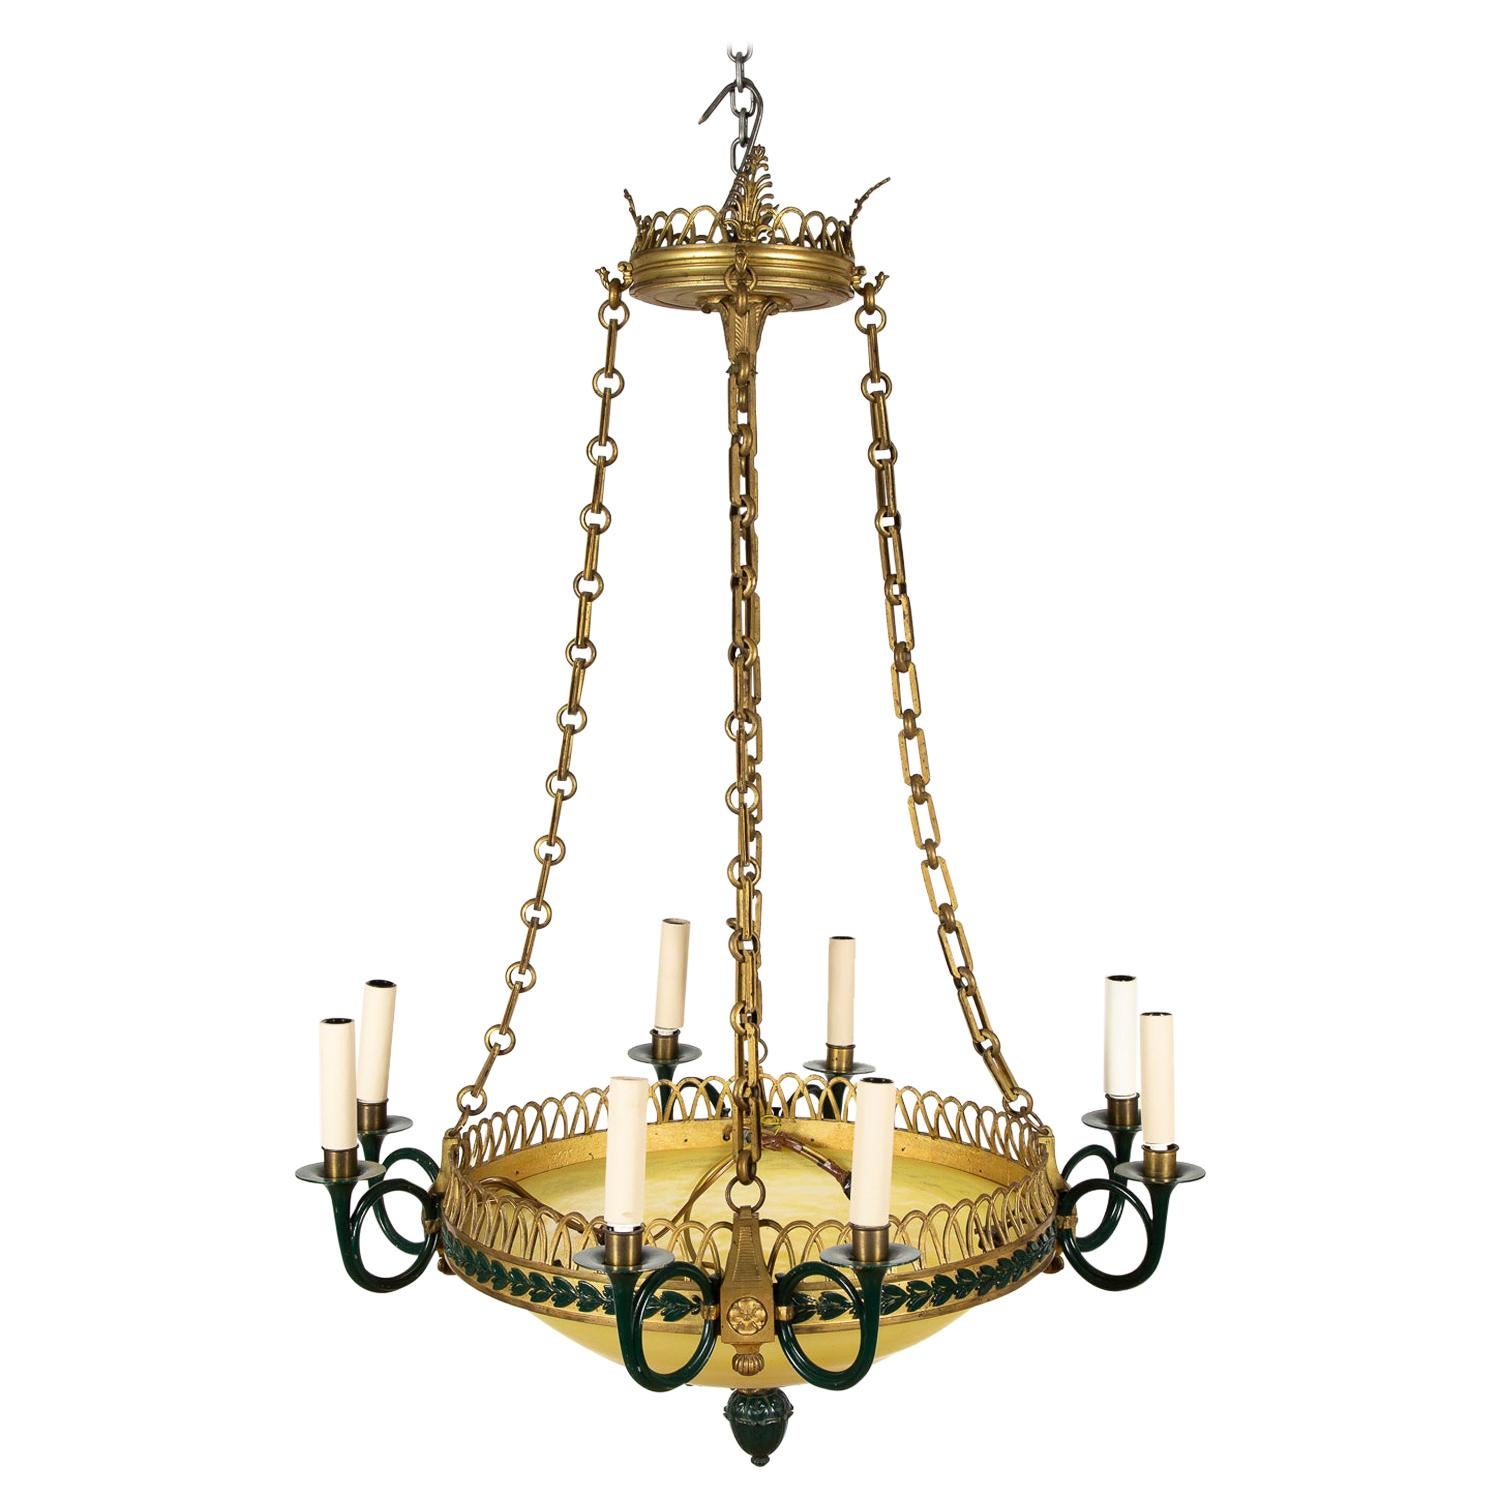 Gilt Bronze and Colored Glass Chandelier in the Empire Style